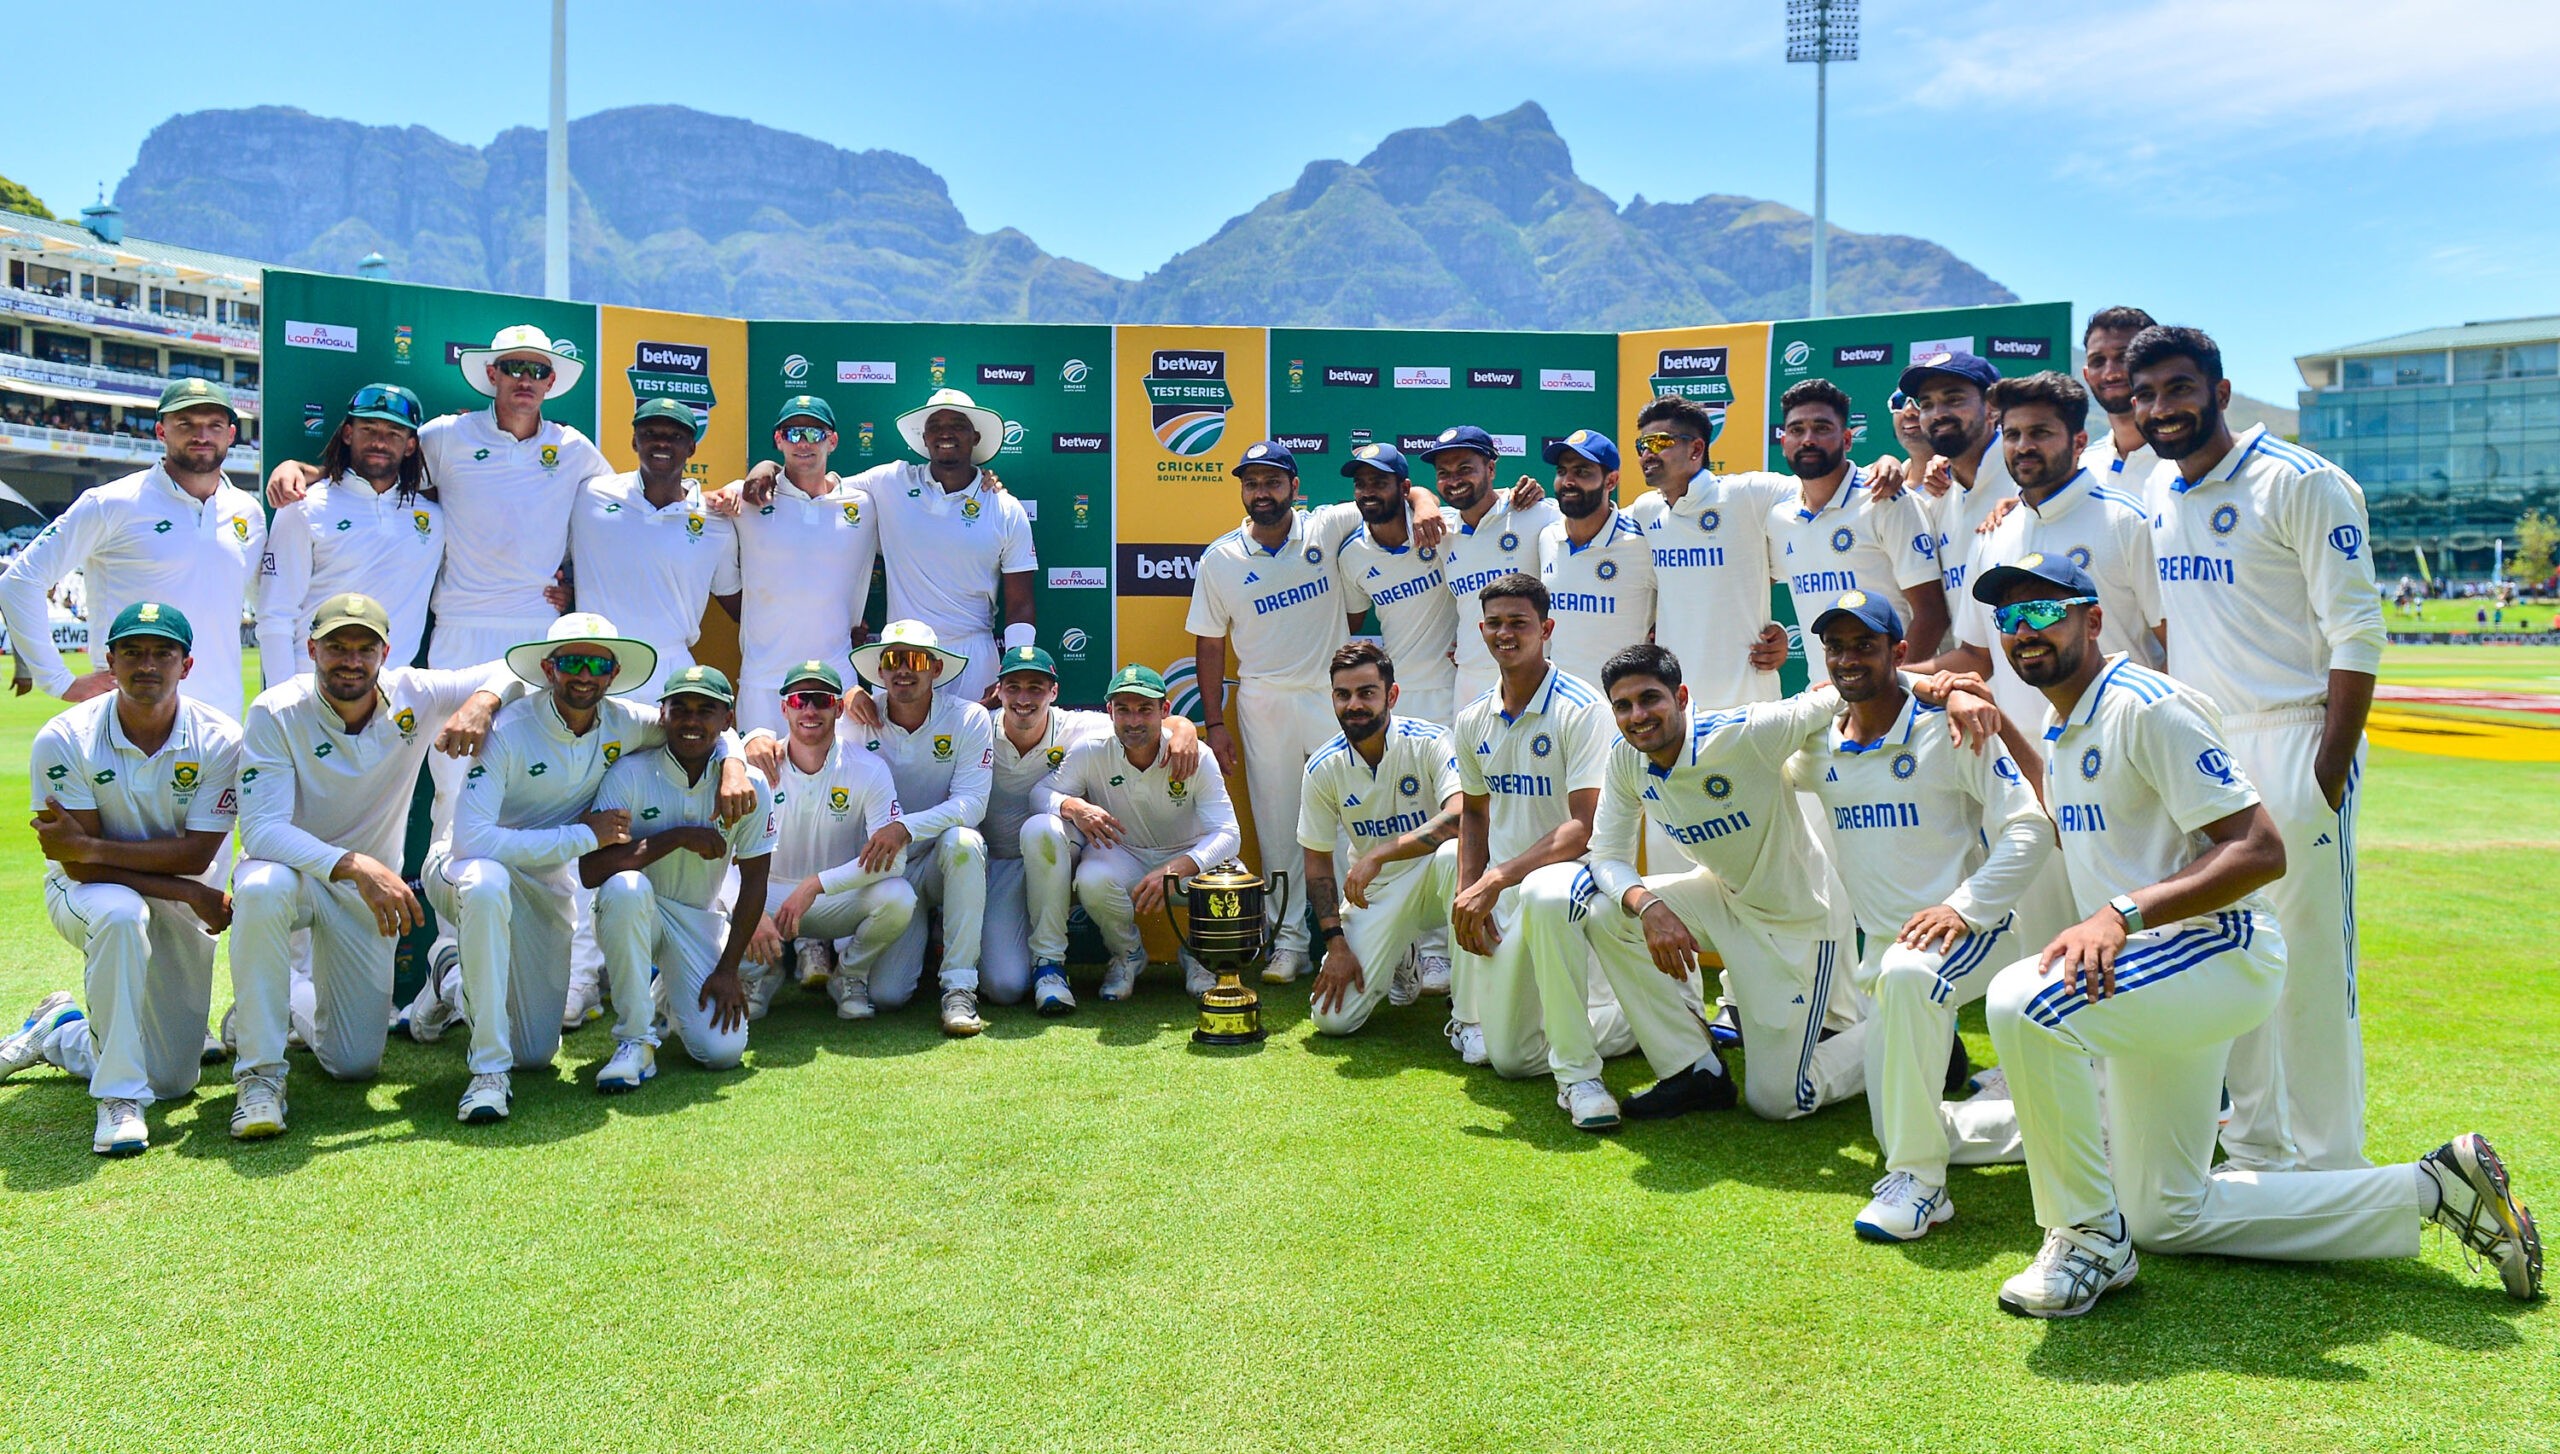 Day 2: India Clinches Dramatic Win in Chaotic Cape Town Test